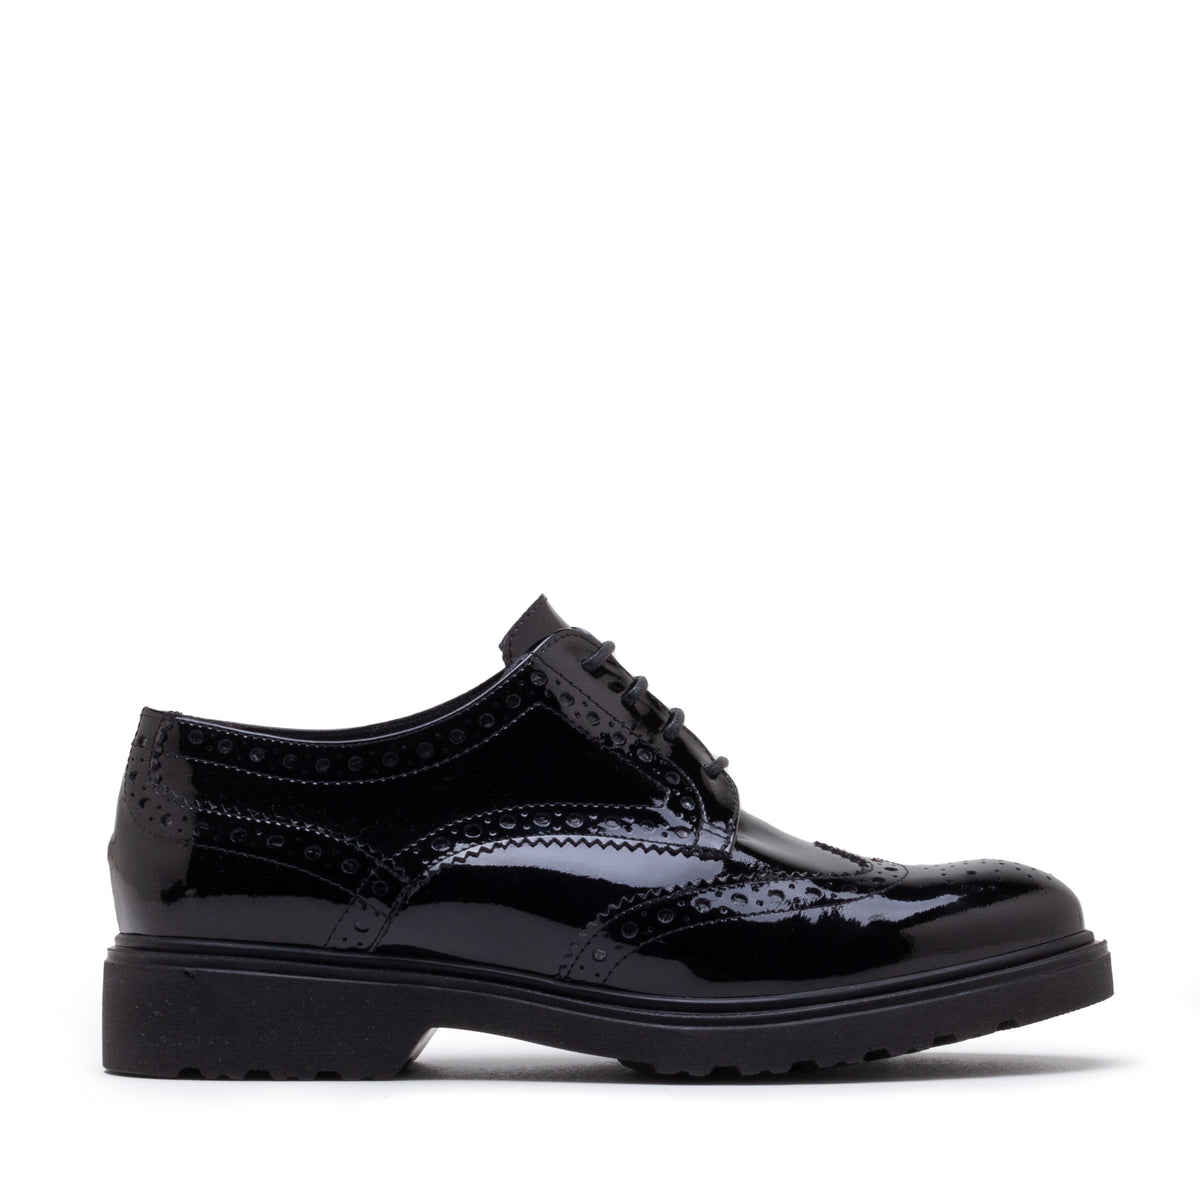 MOTOWN LACE-UP LOAFER